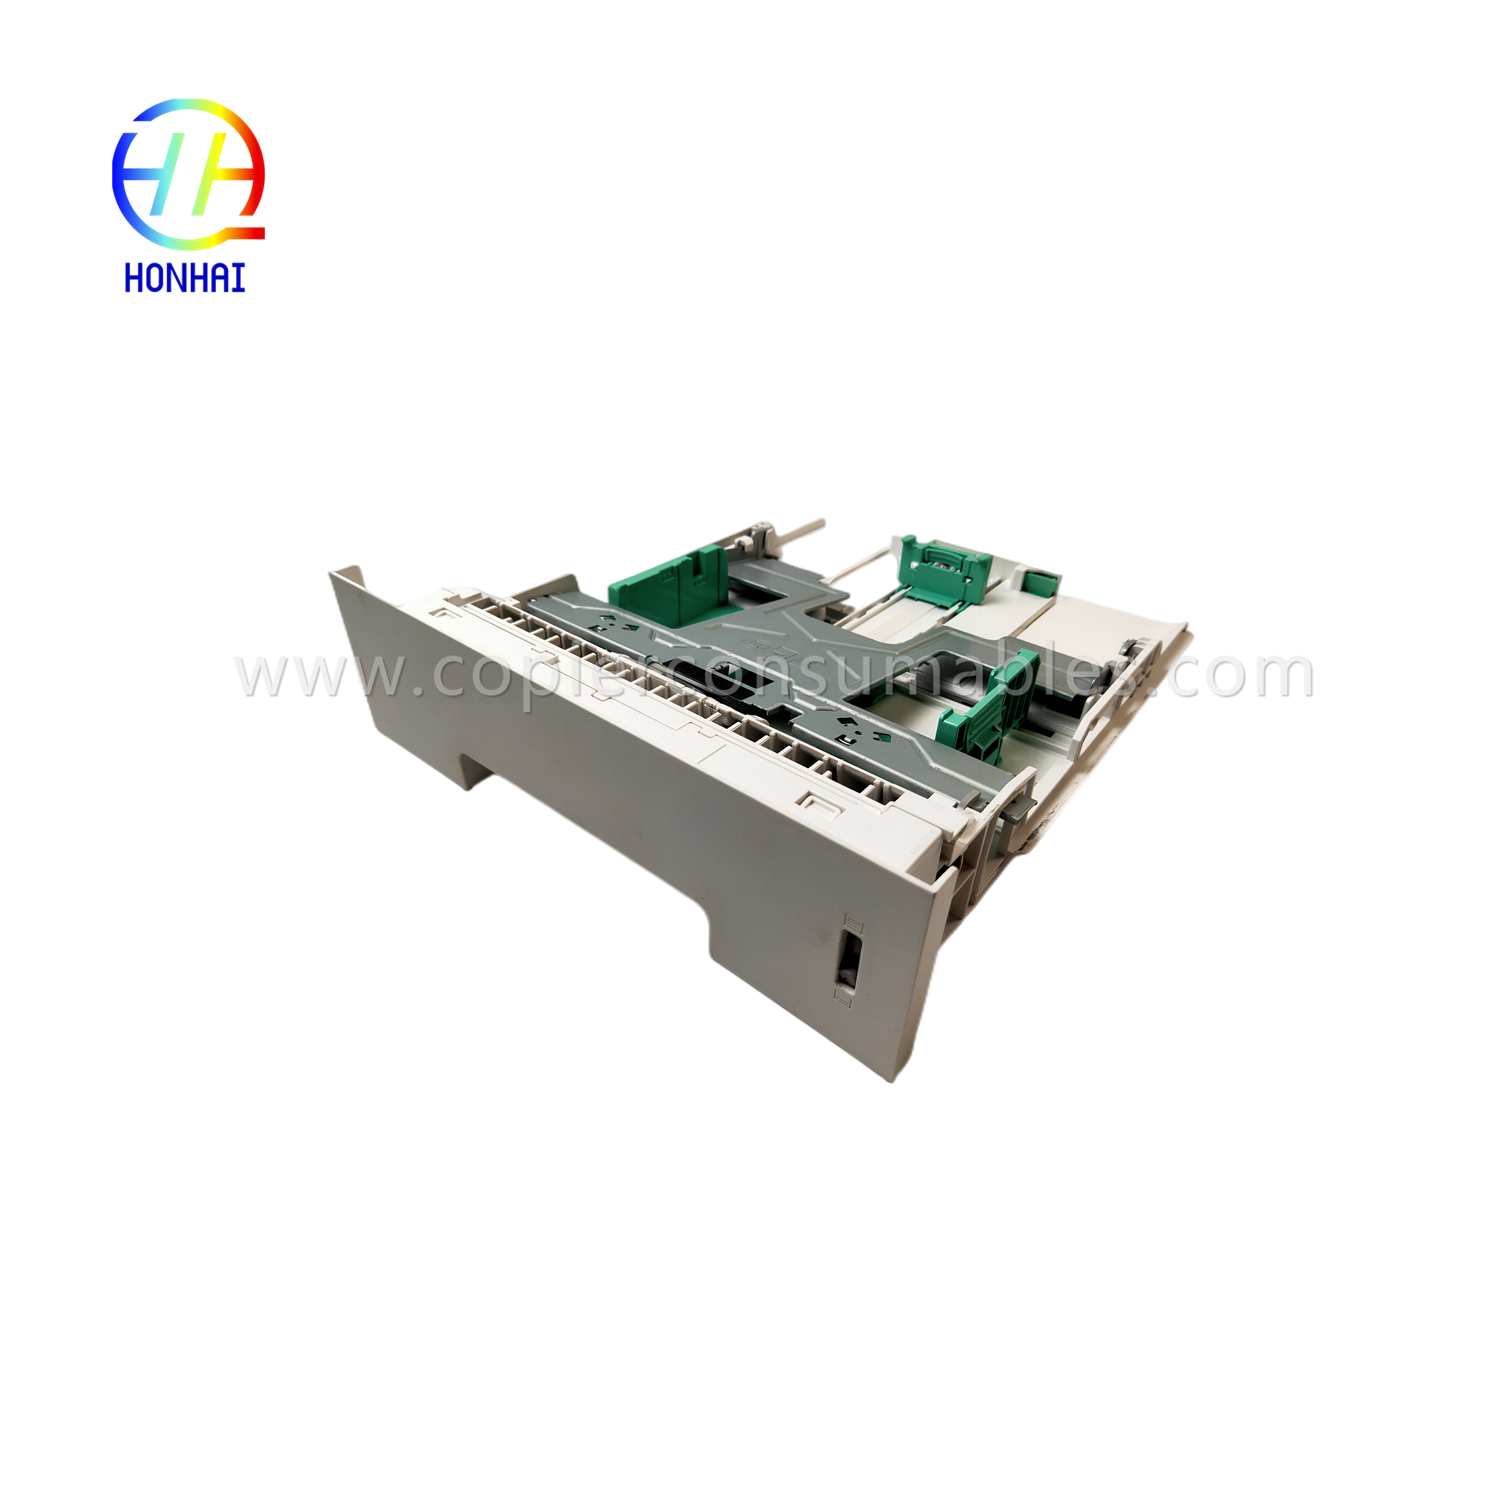 https://c585.goodao.net/paper-tray-assembly-for-xerox-phaser-3320dni-workcentre-3315dn-3325dni-050n00650-cassette-paper-tray-product/